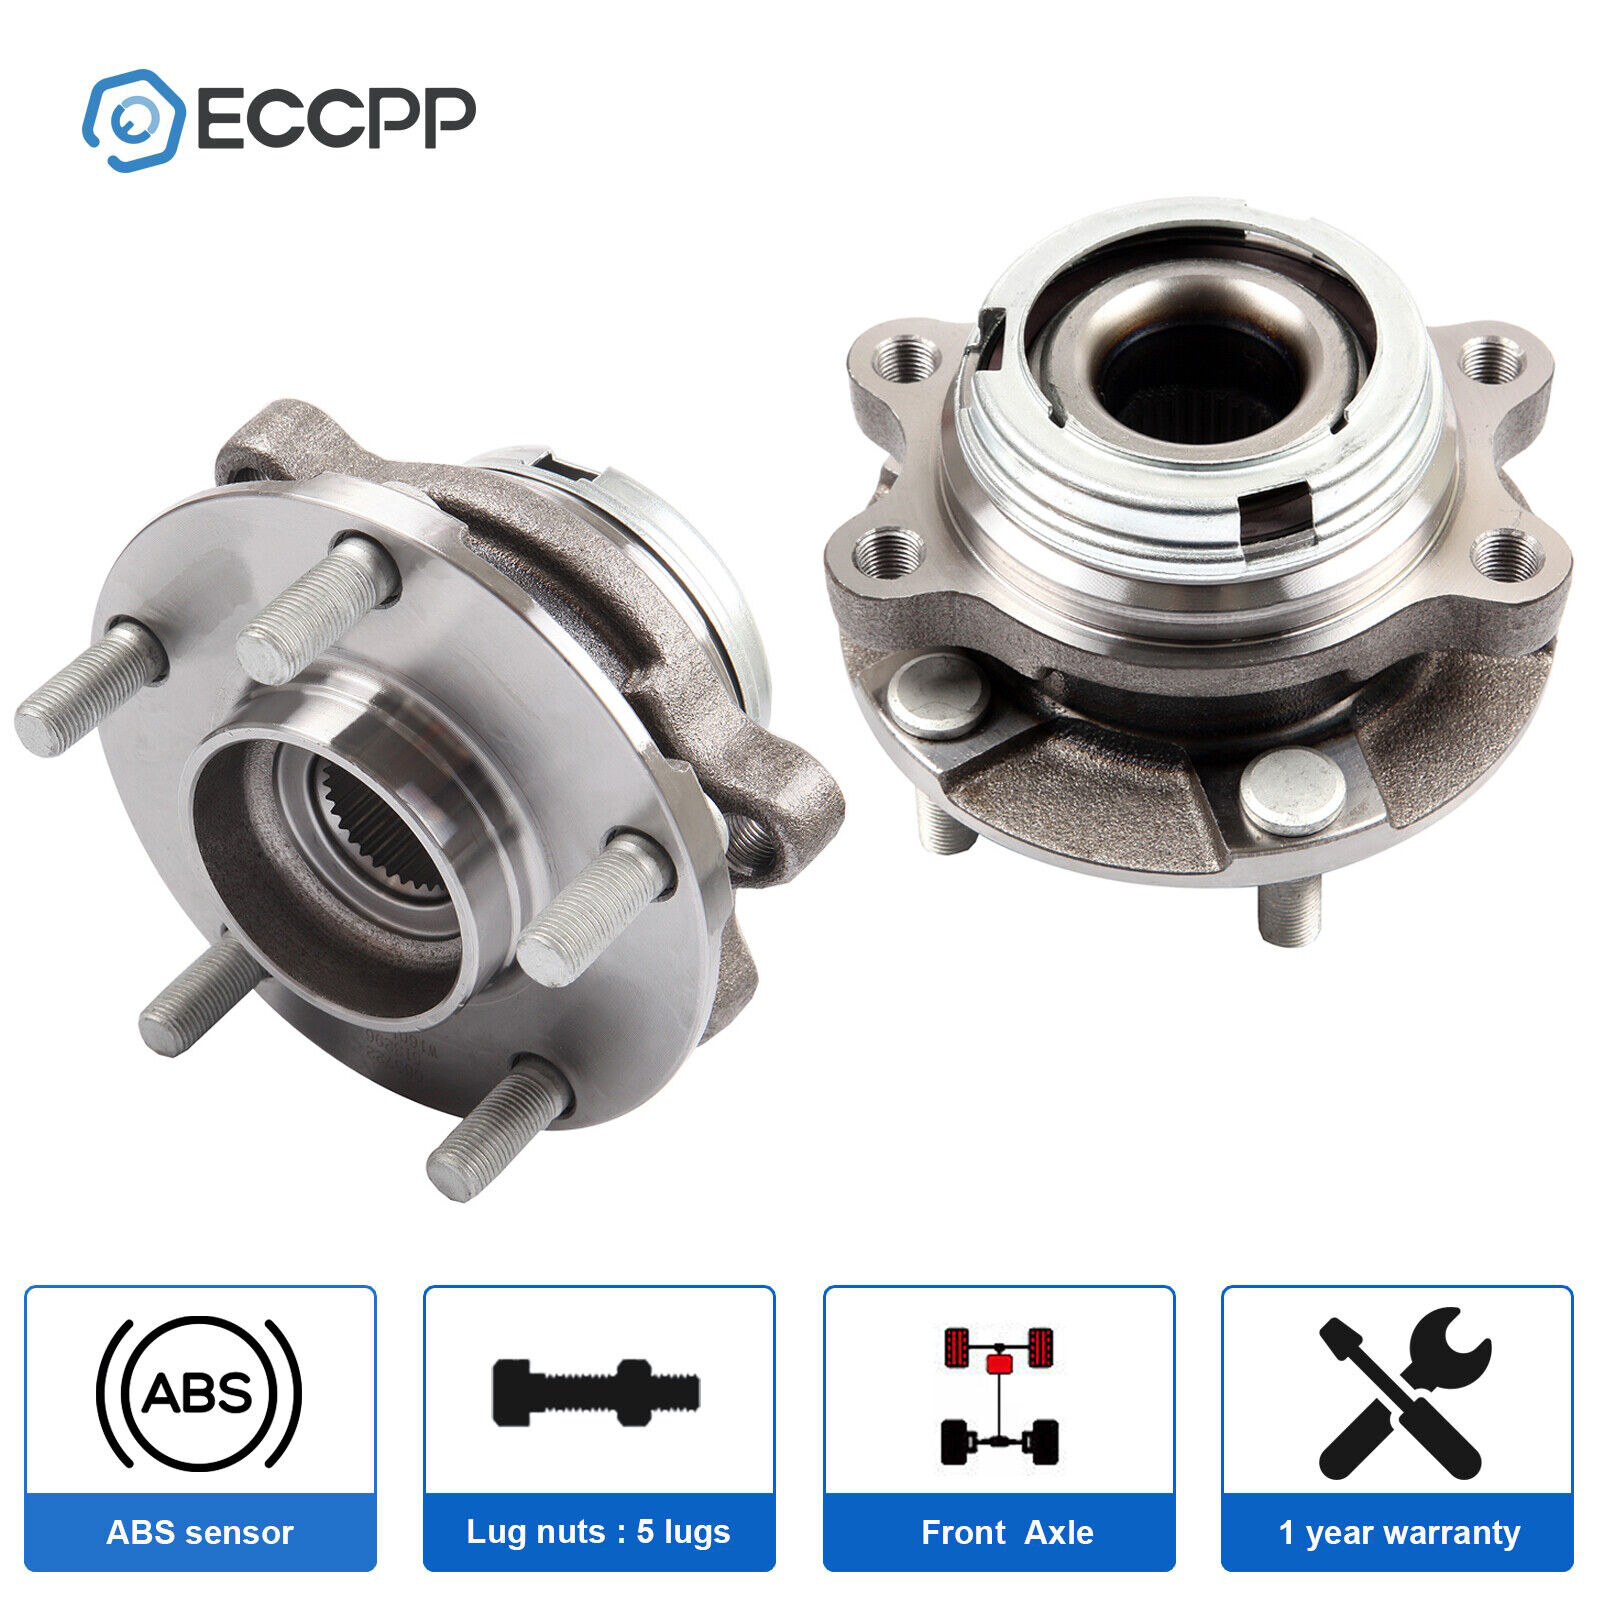 2 Pcs Wheel Hub Bearings Front For Nissan Altima Maxima Murano Pathfinder Quest